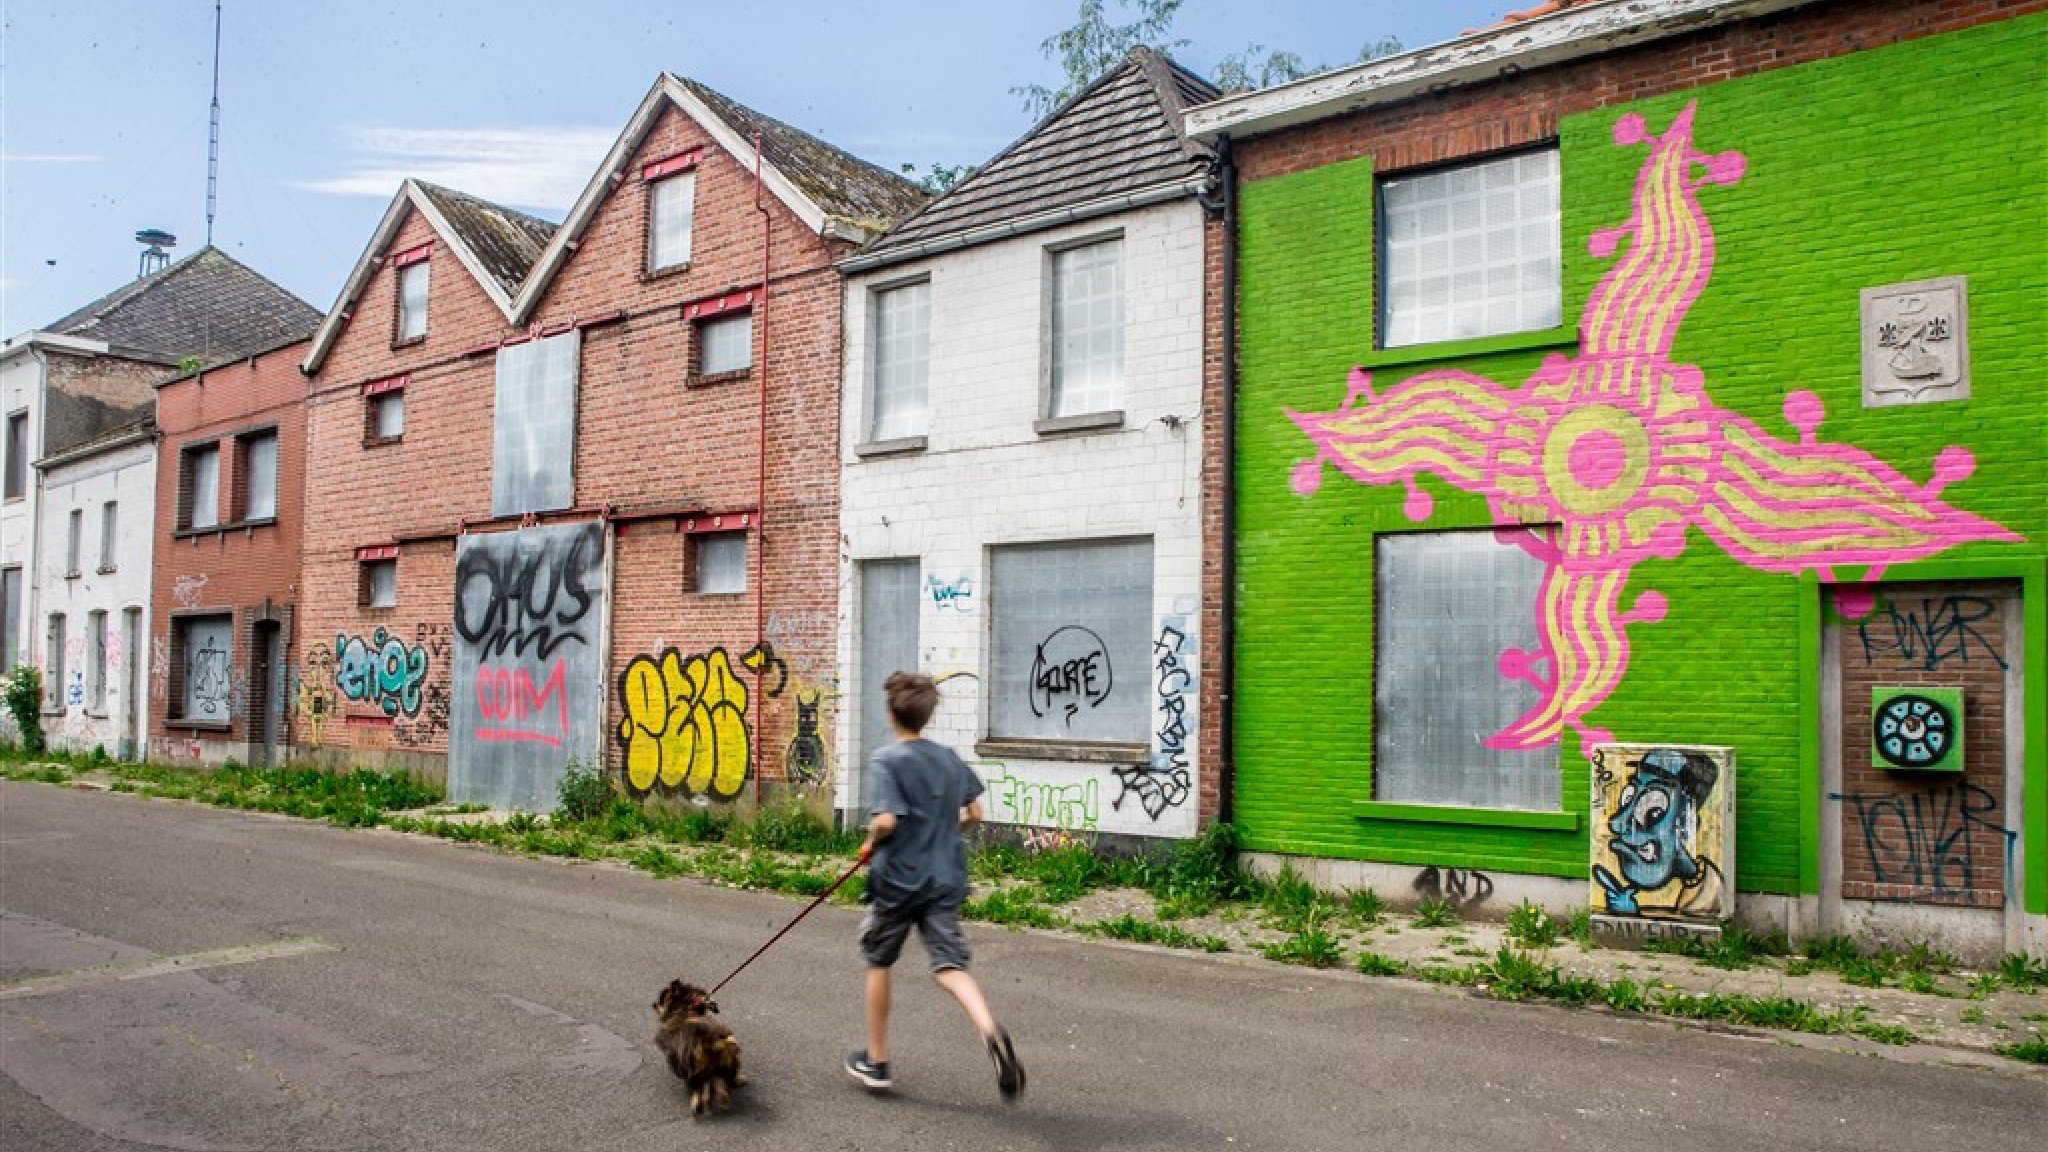 Rebuilding the "ghost village" of Doel: "a lot of potential"